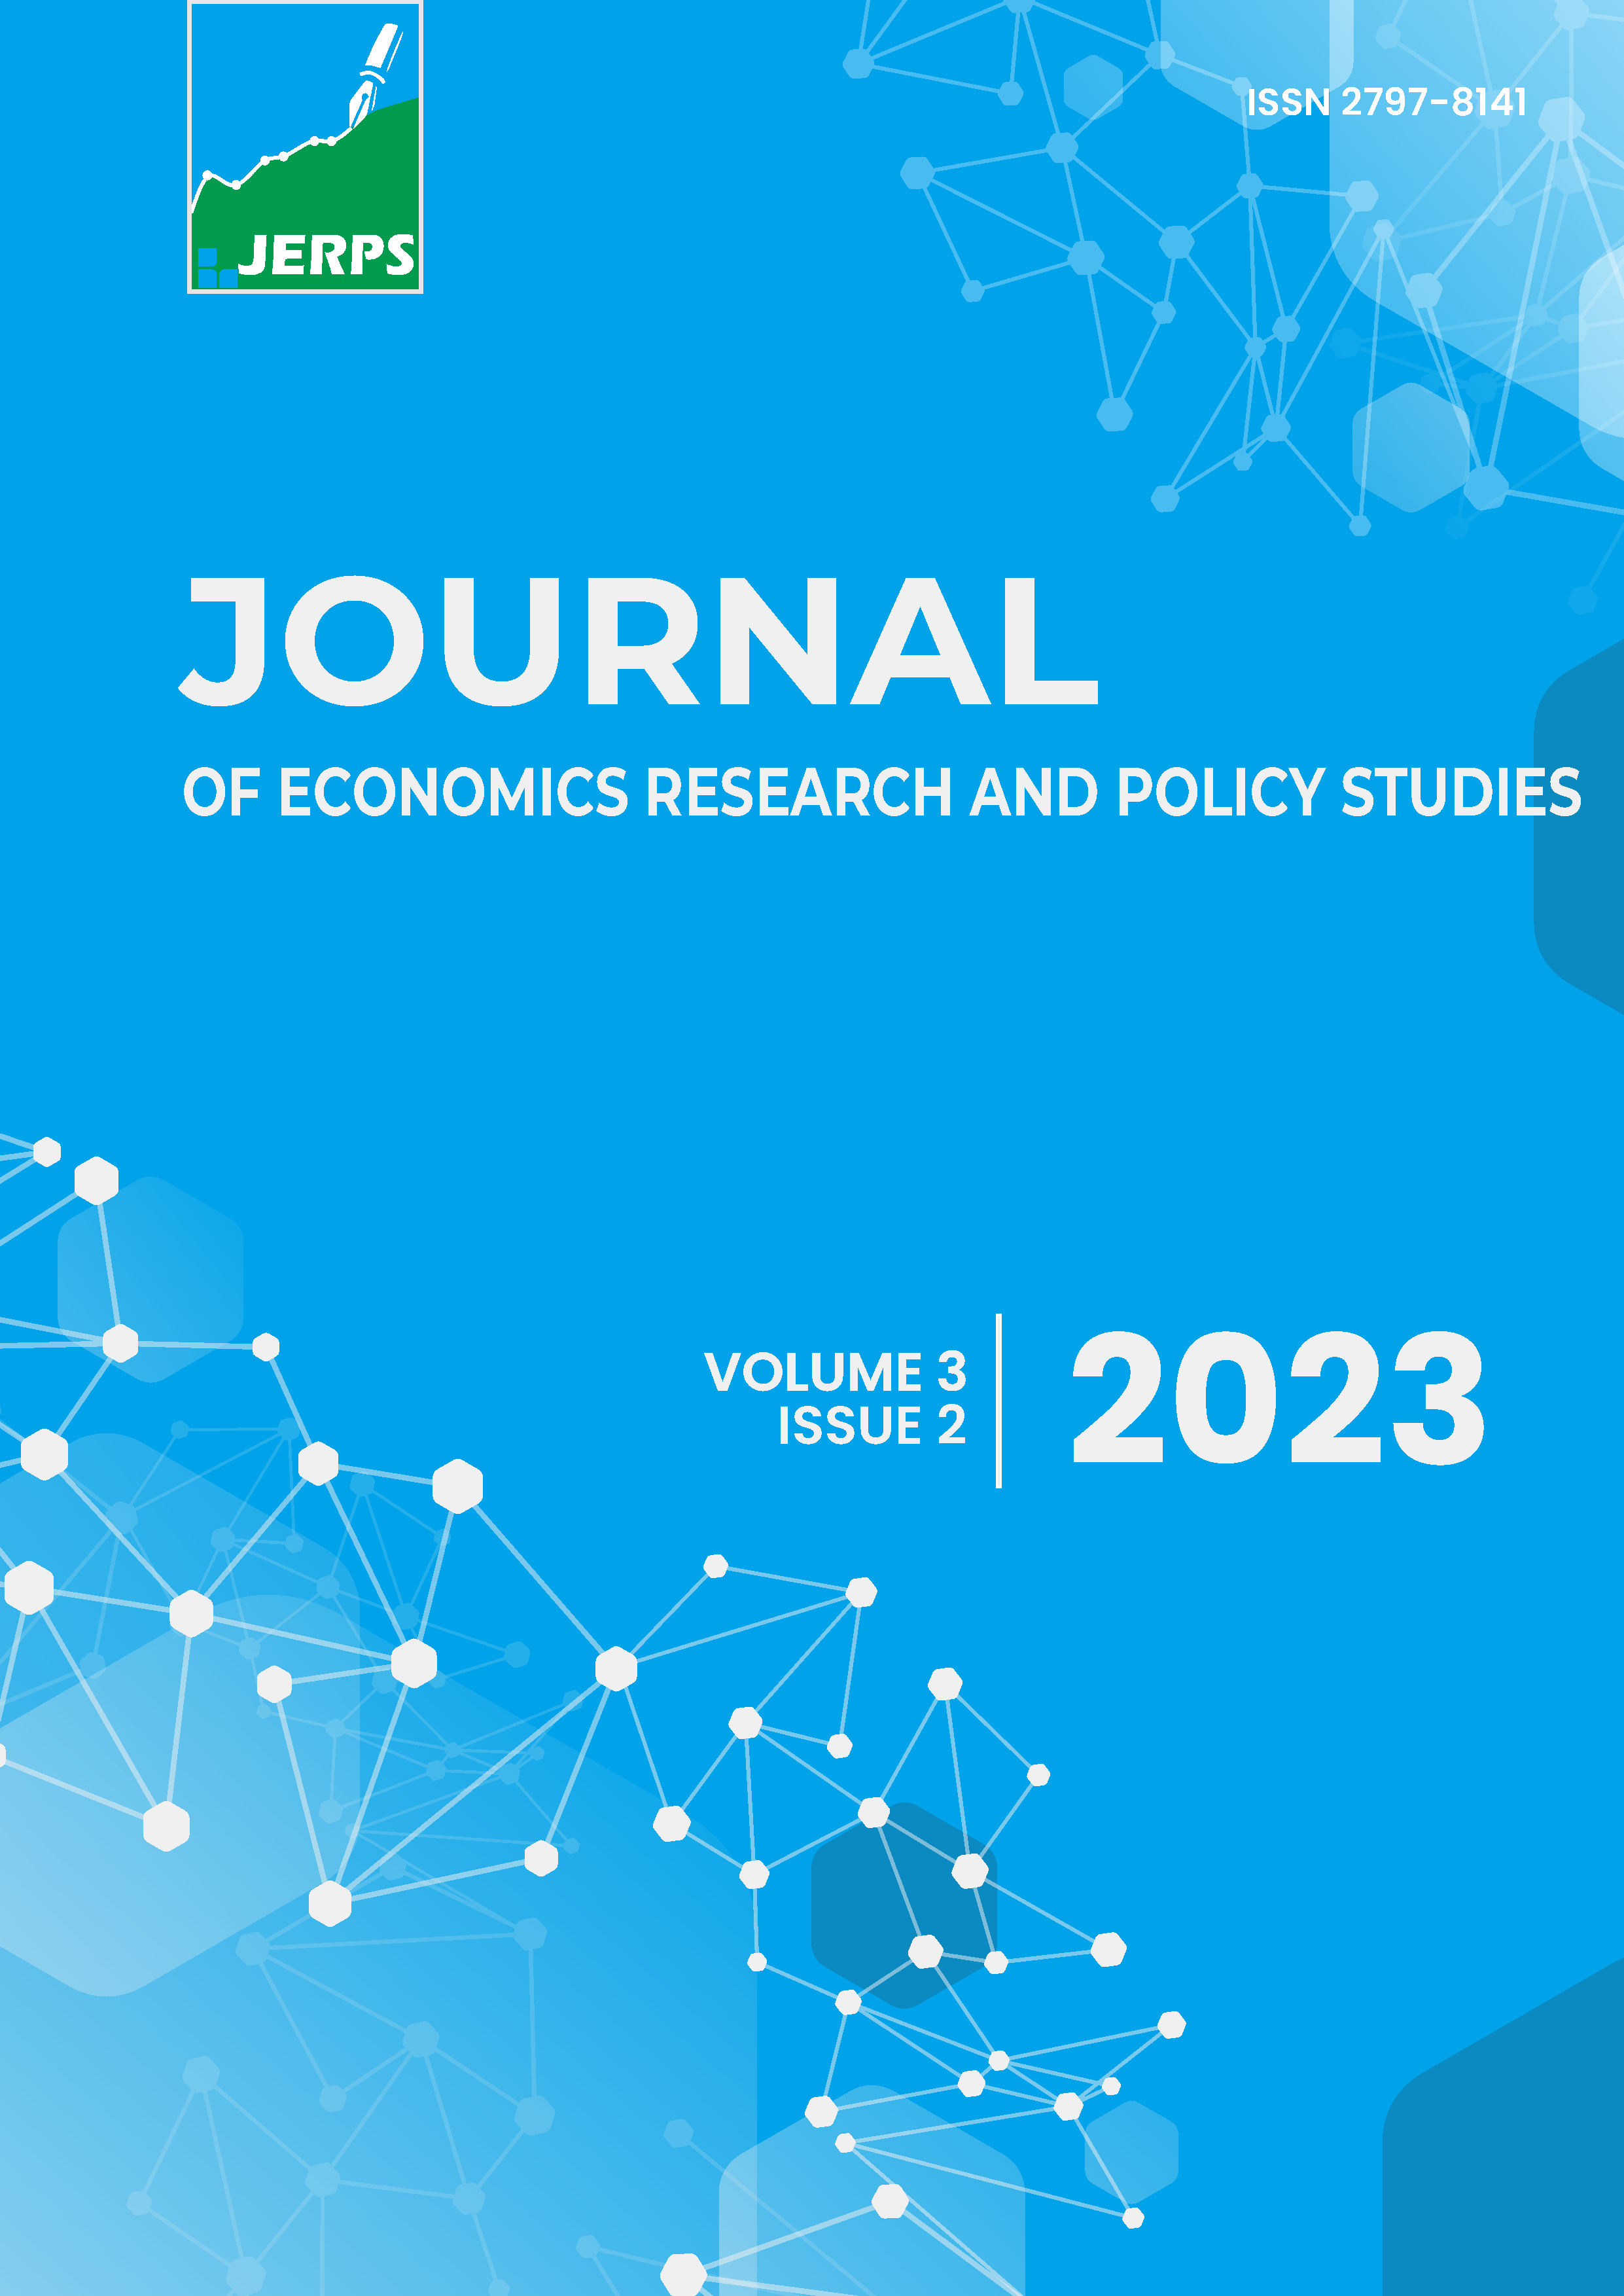 					View Vol. 3 No. 2 (2023): Journal of Economics Research and Policy Studies
				